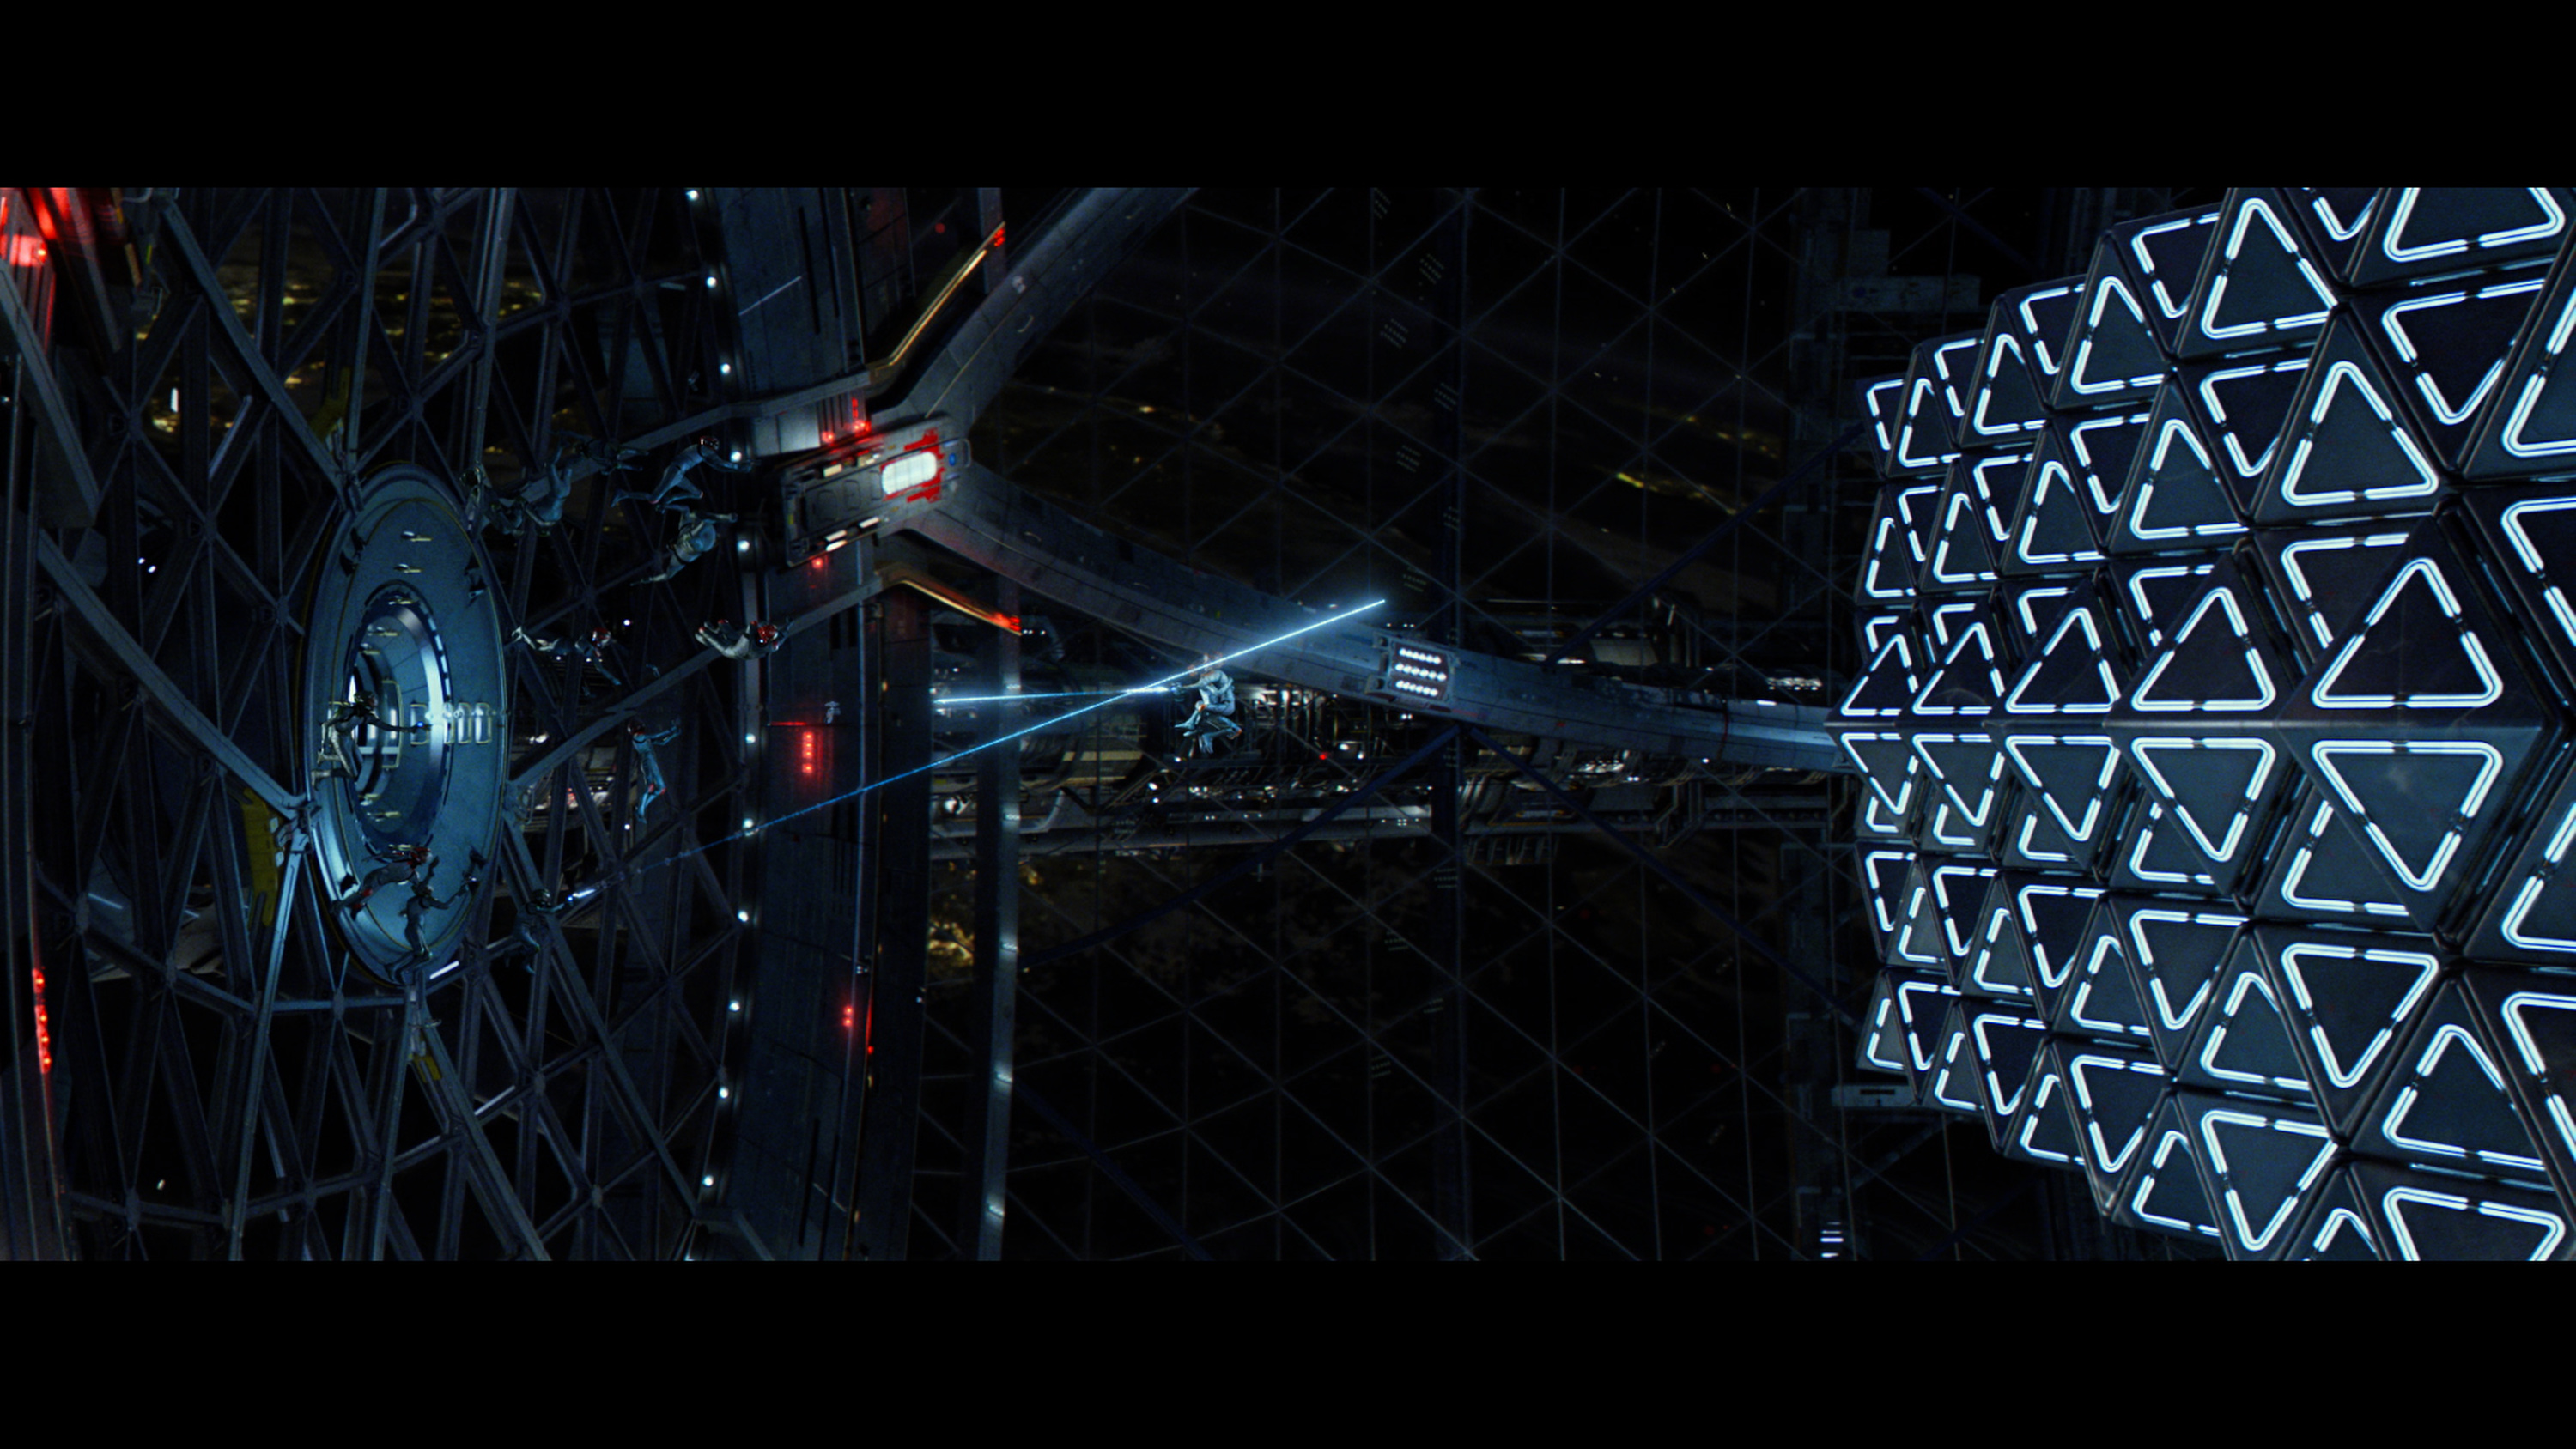 Movie Ender's Game HD Wallpaper | Background Image